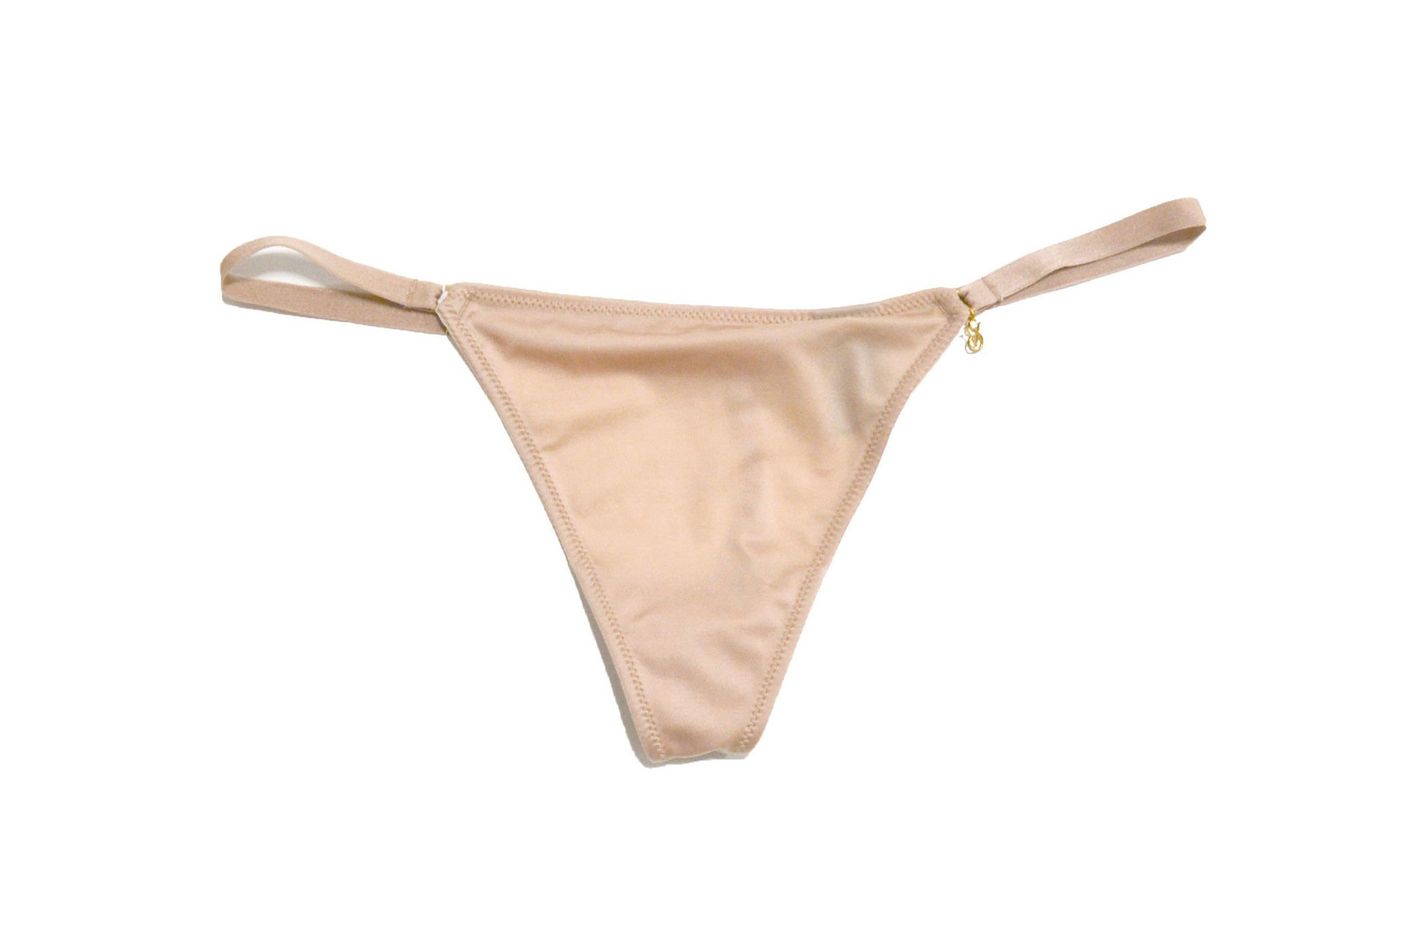 15 Cotton Thongs That Are Cool and Comfortable, WhoWhatWear.com